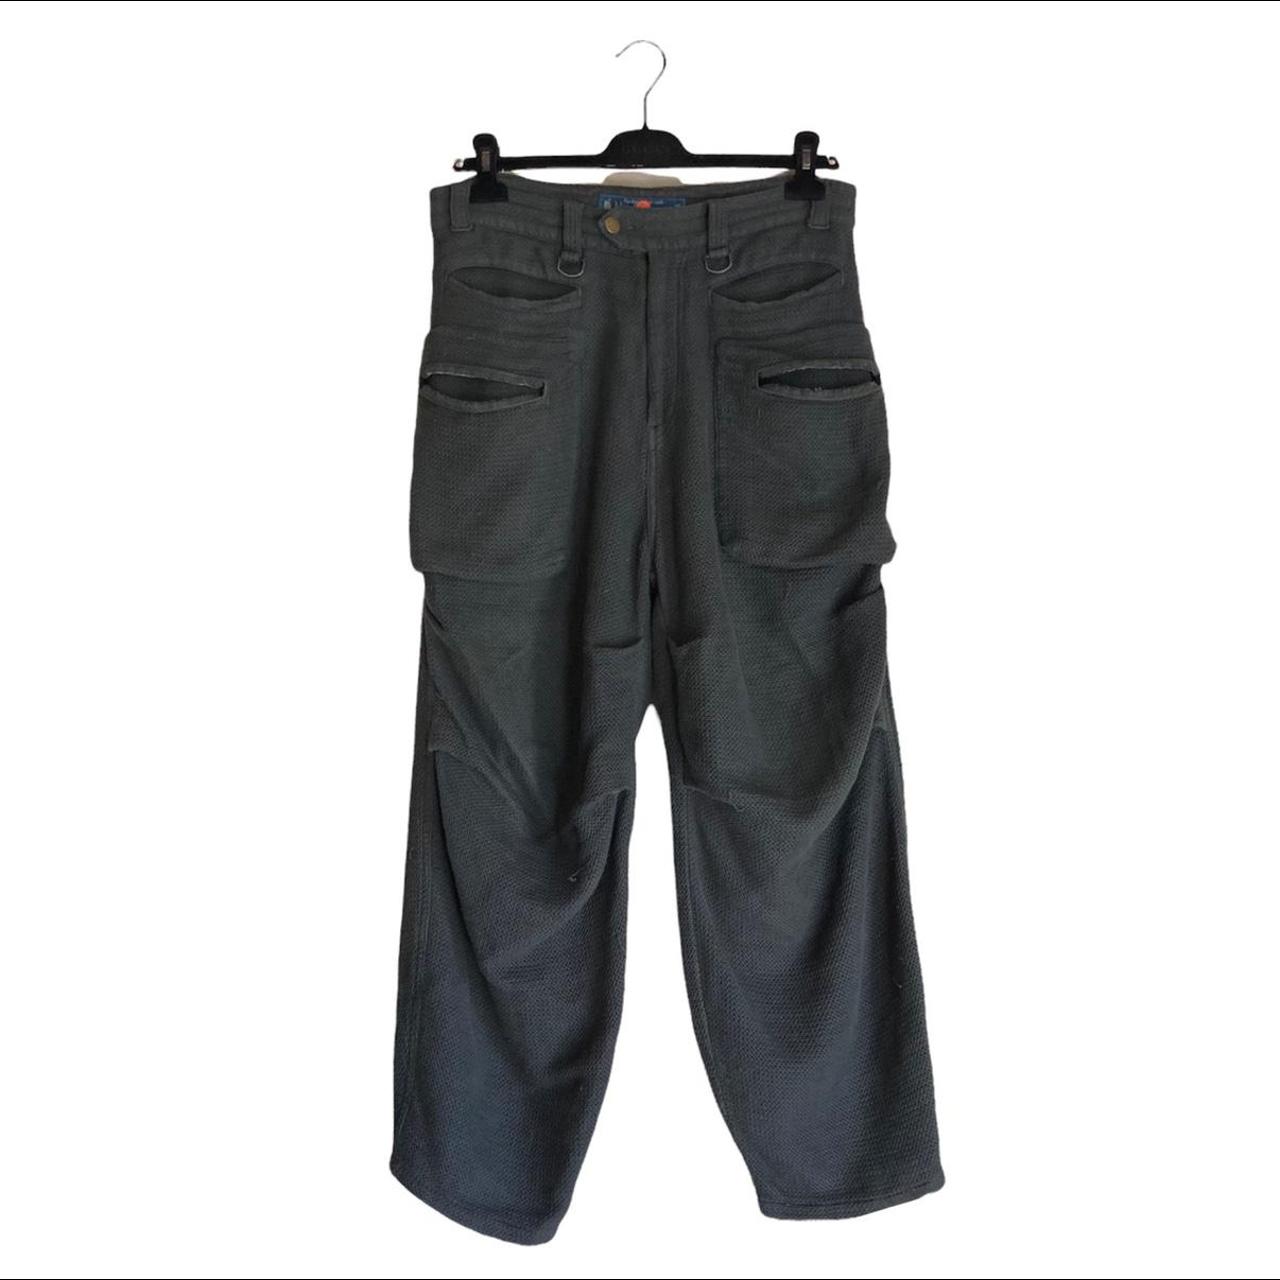 Product Image 1 - #Blackmeans cargo pants 

Lightweight thermal